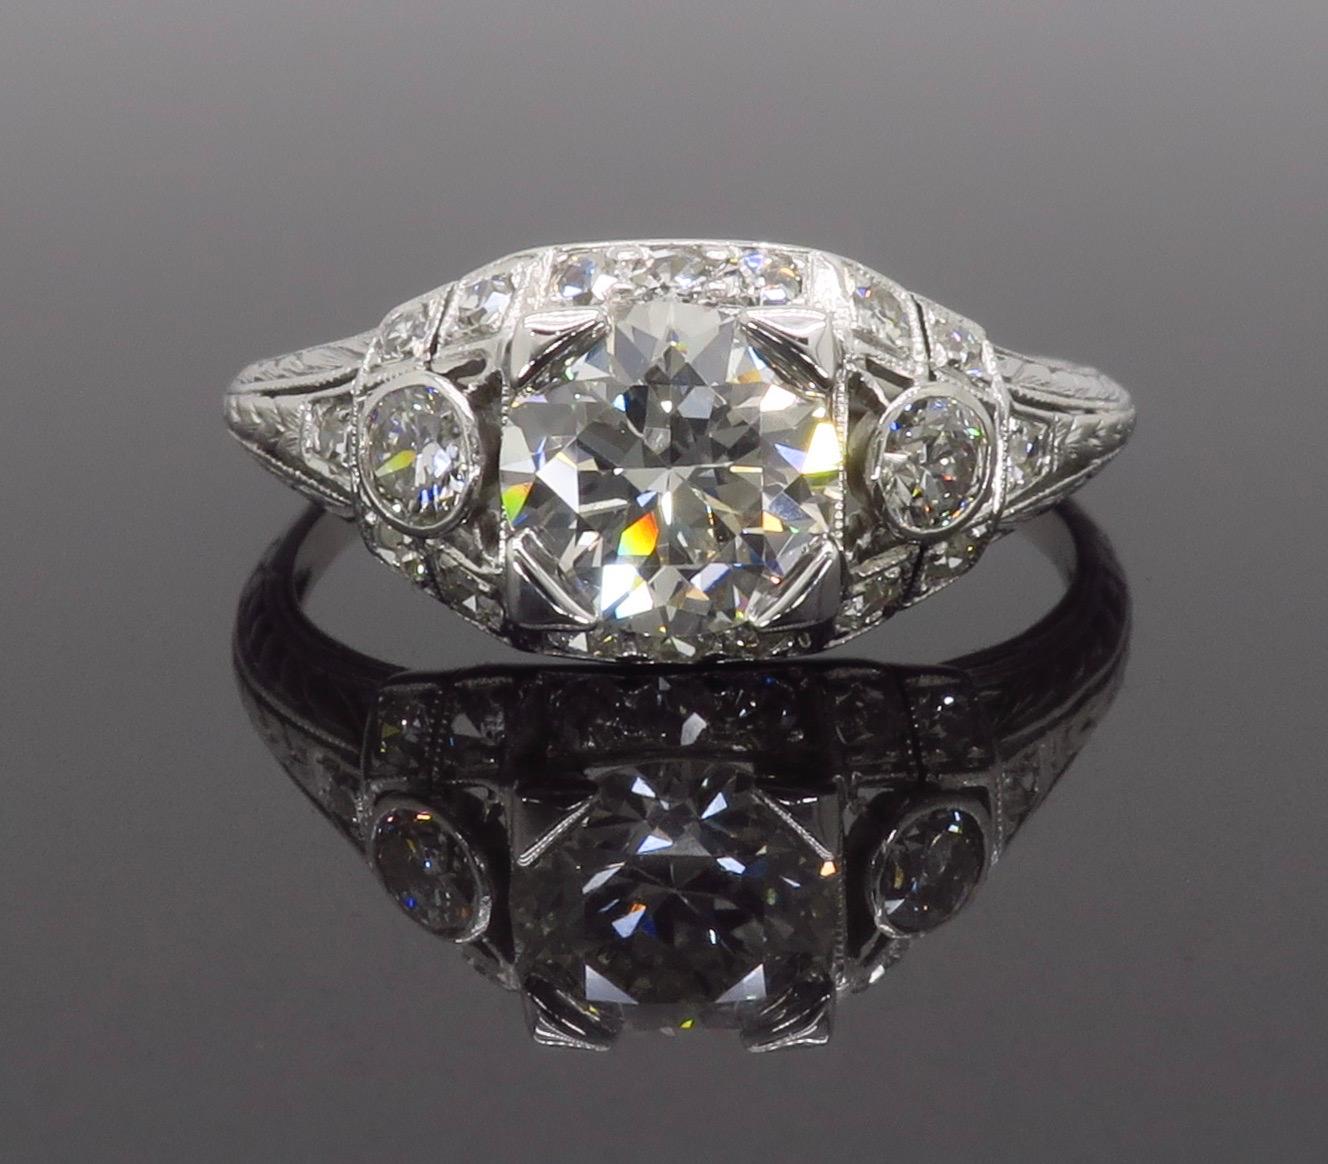 Vintage approximately 1.40CTW diamond ring crafted in platinum with a 14k white gold shank.

Center Diamond Carat Weight: Approximately 1.00CT
Center Diamond Cut: Transitional Cut
Center Diamond Color: H
Center Diamond Clarity: VS2
Total Diamond